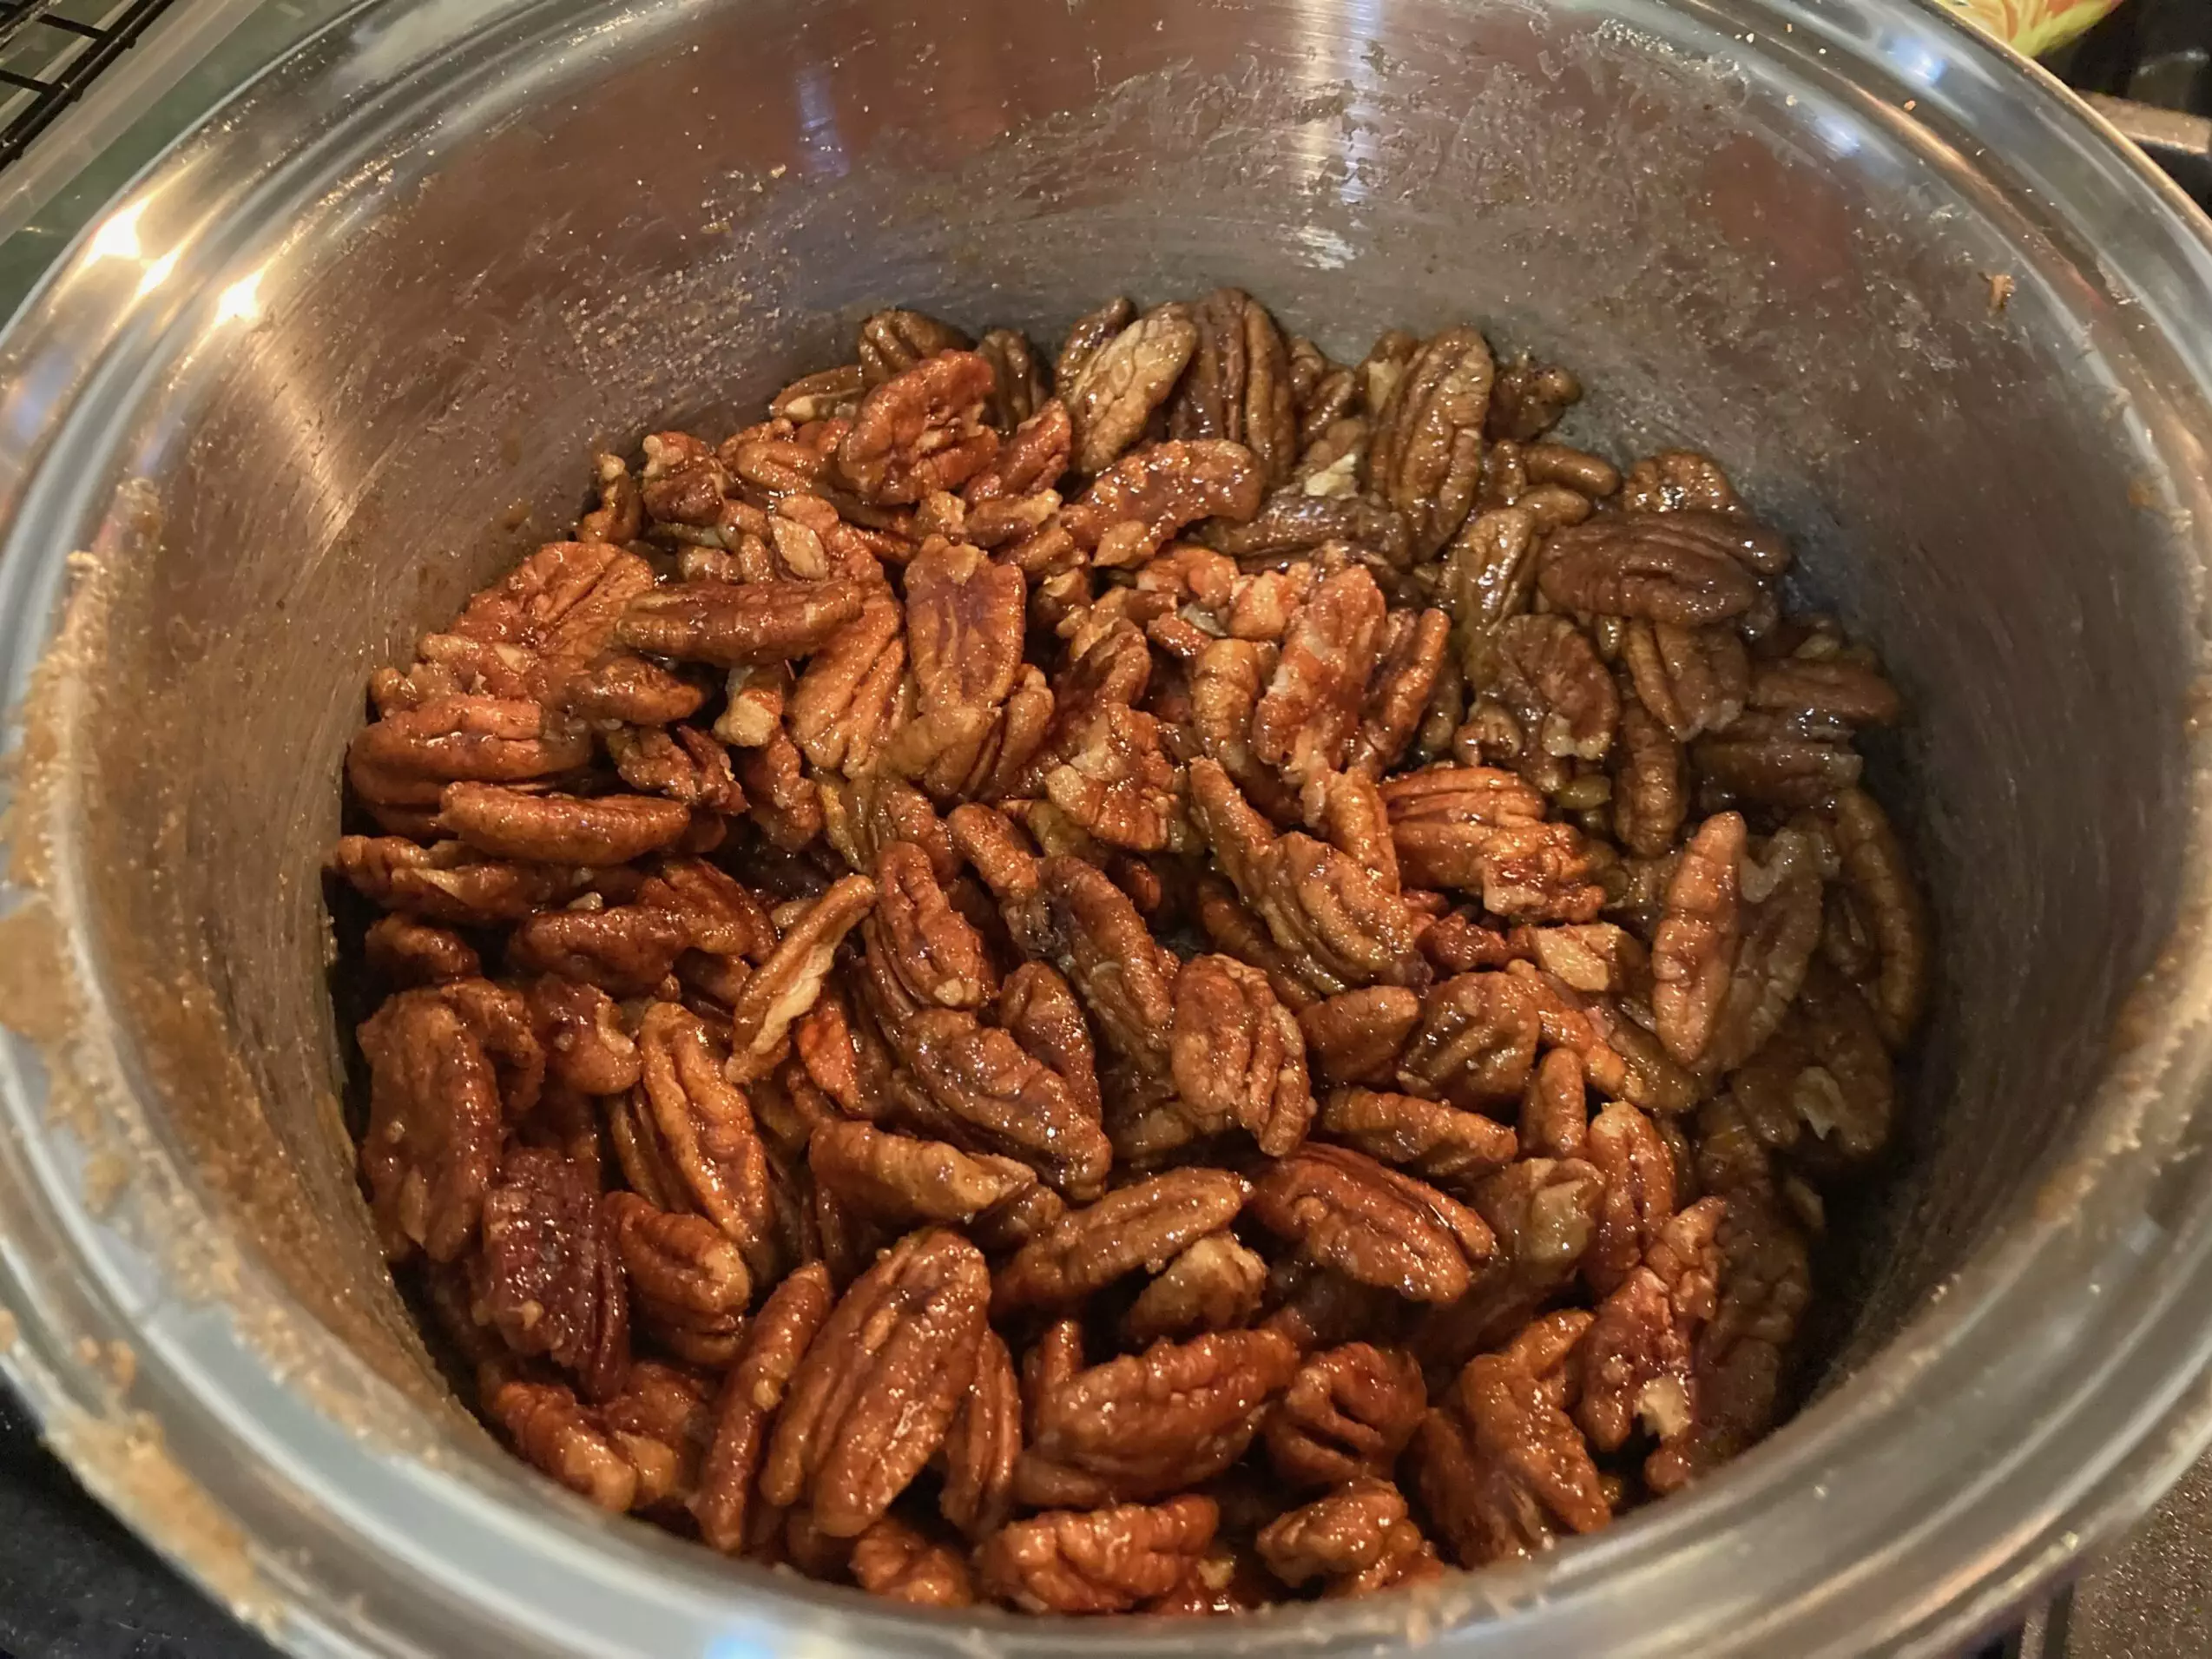 Candied pecans from Out of the Box Baking.com